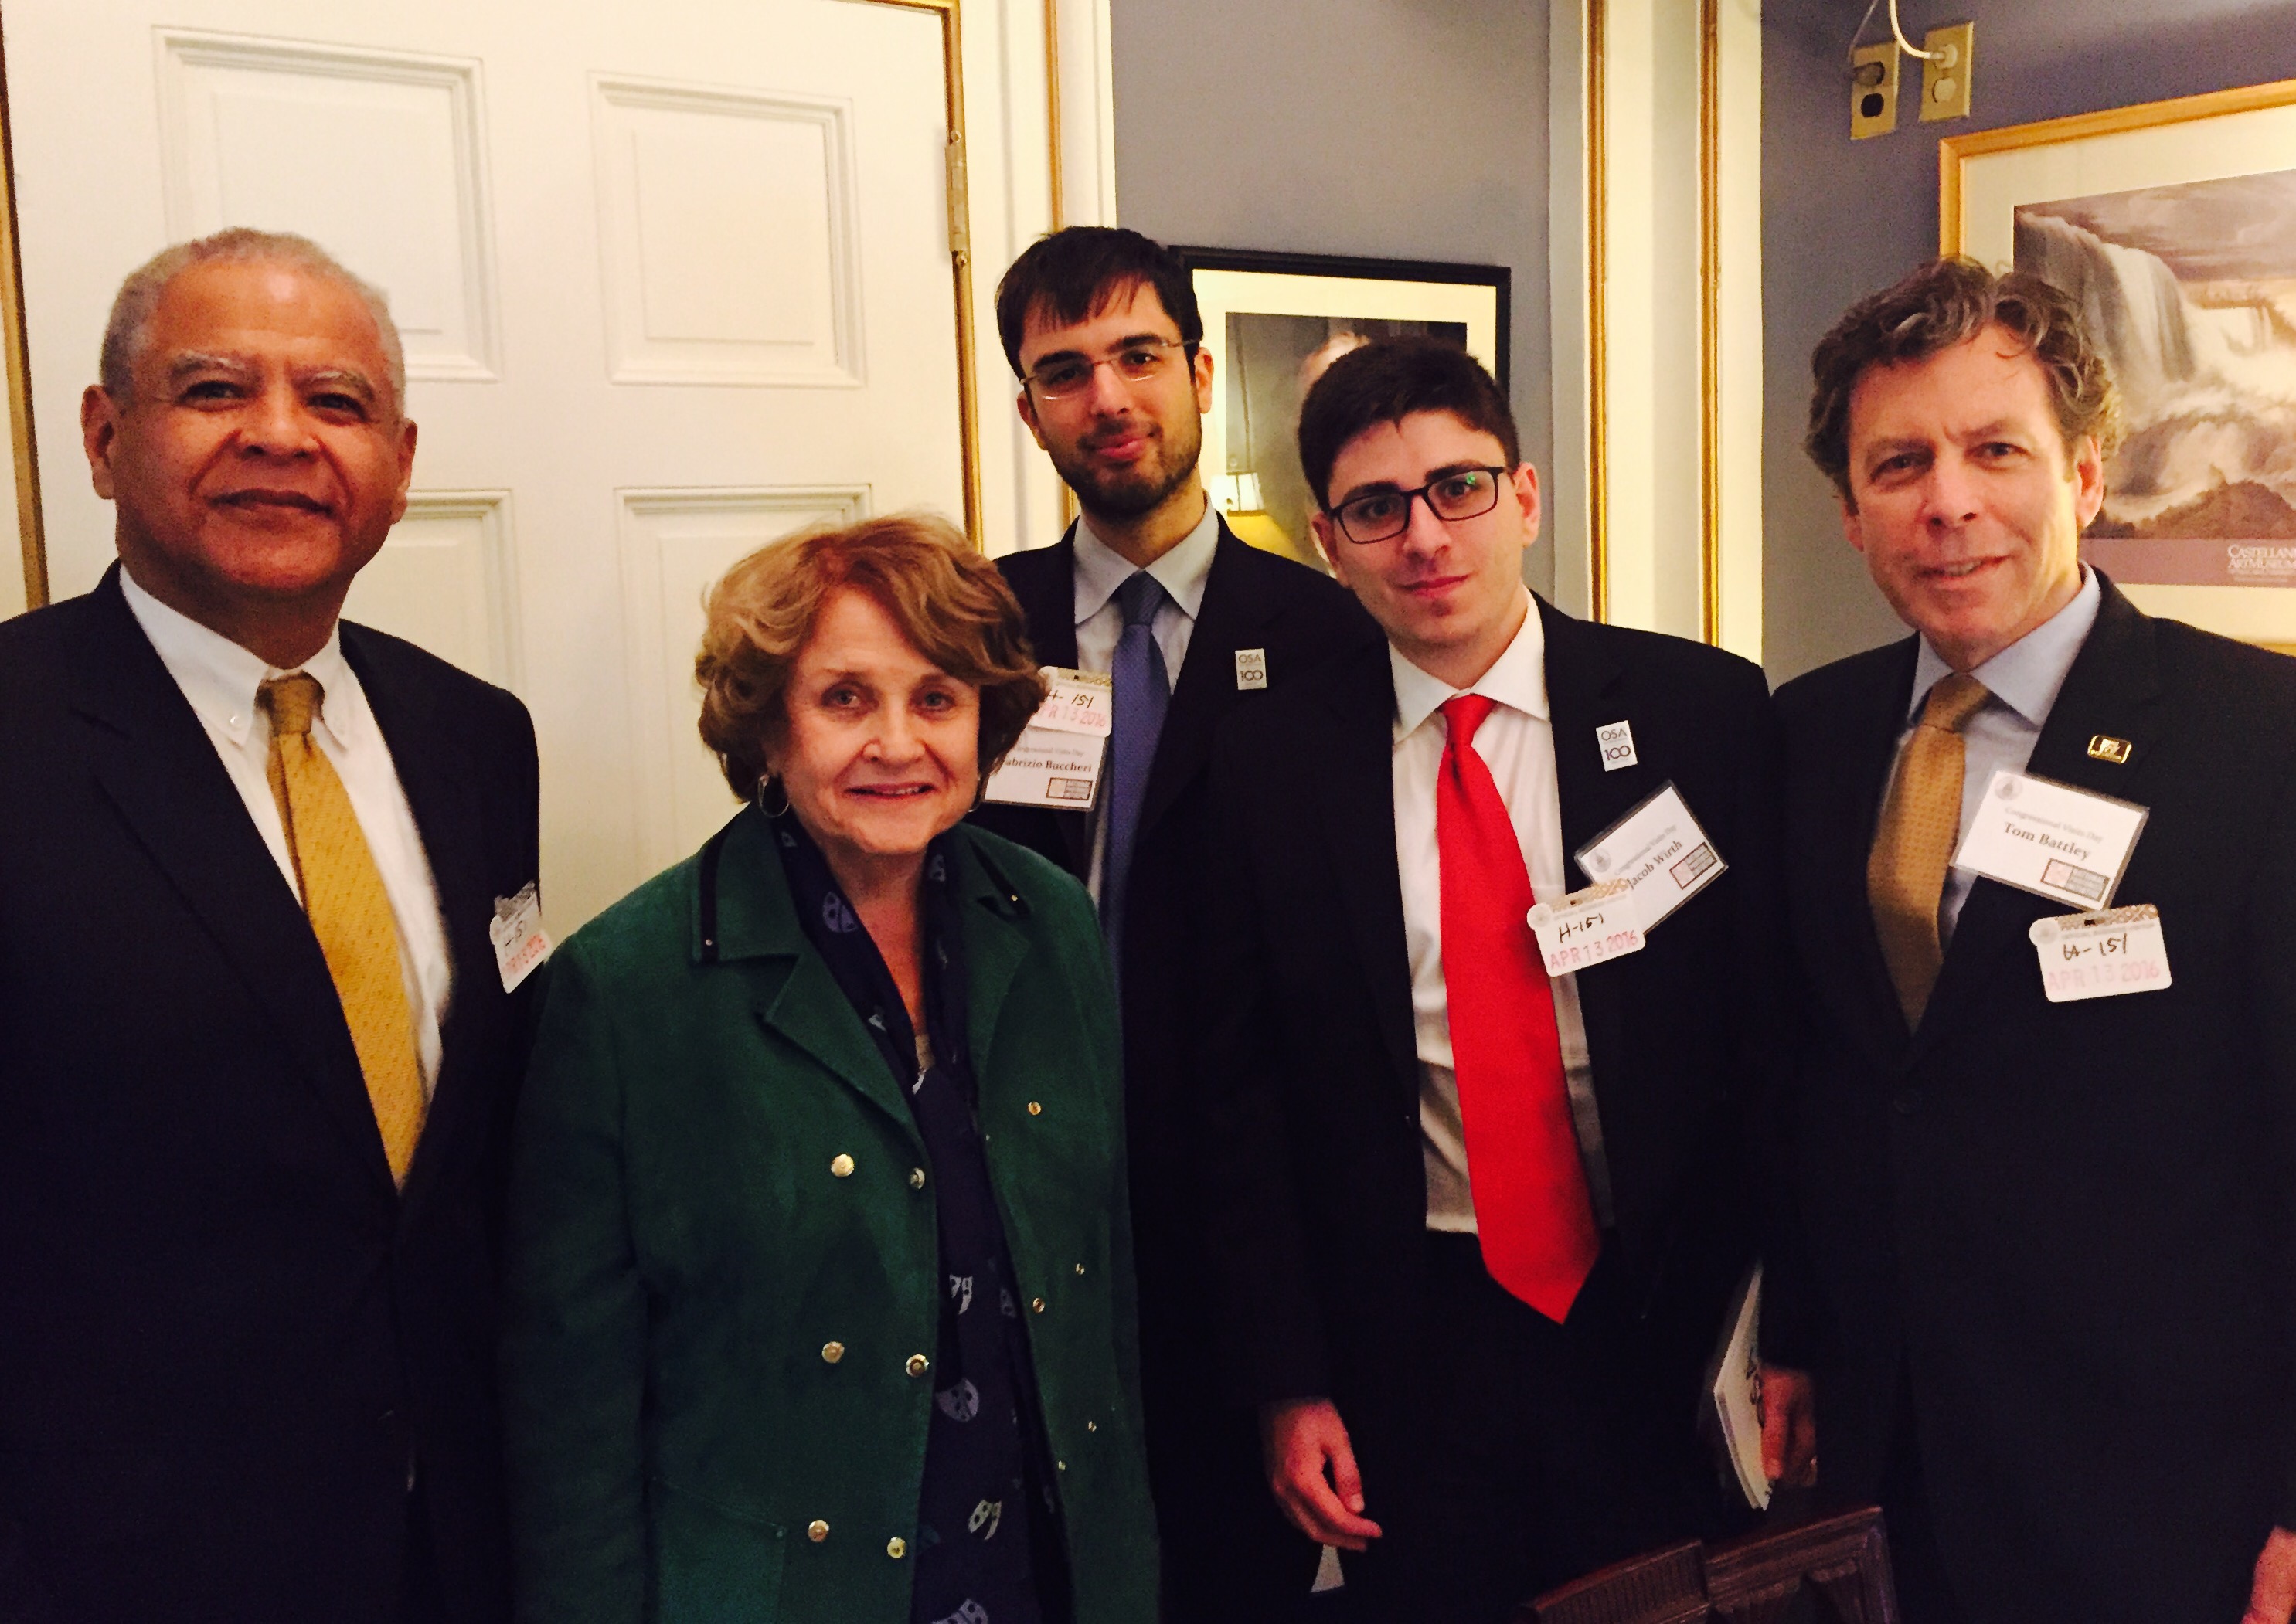 In Rochester Congresswoman Louise Slaughter's office. Left to right: AIM Photonics Executive, Ed White; Congresswoman Louise Slaughter (NY25); UR PhD candidate, Fabrizio Buccheri; RIT PhD candidate, Jacob Wirth; New York Photonics Executive Director, Tom Battley